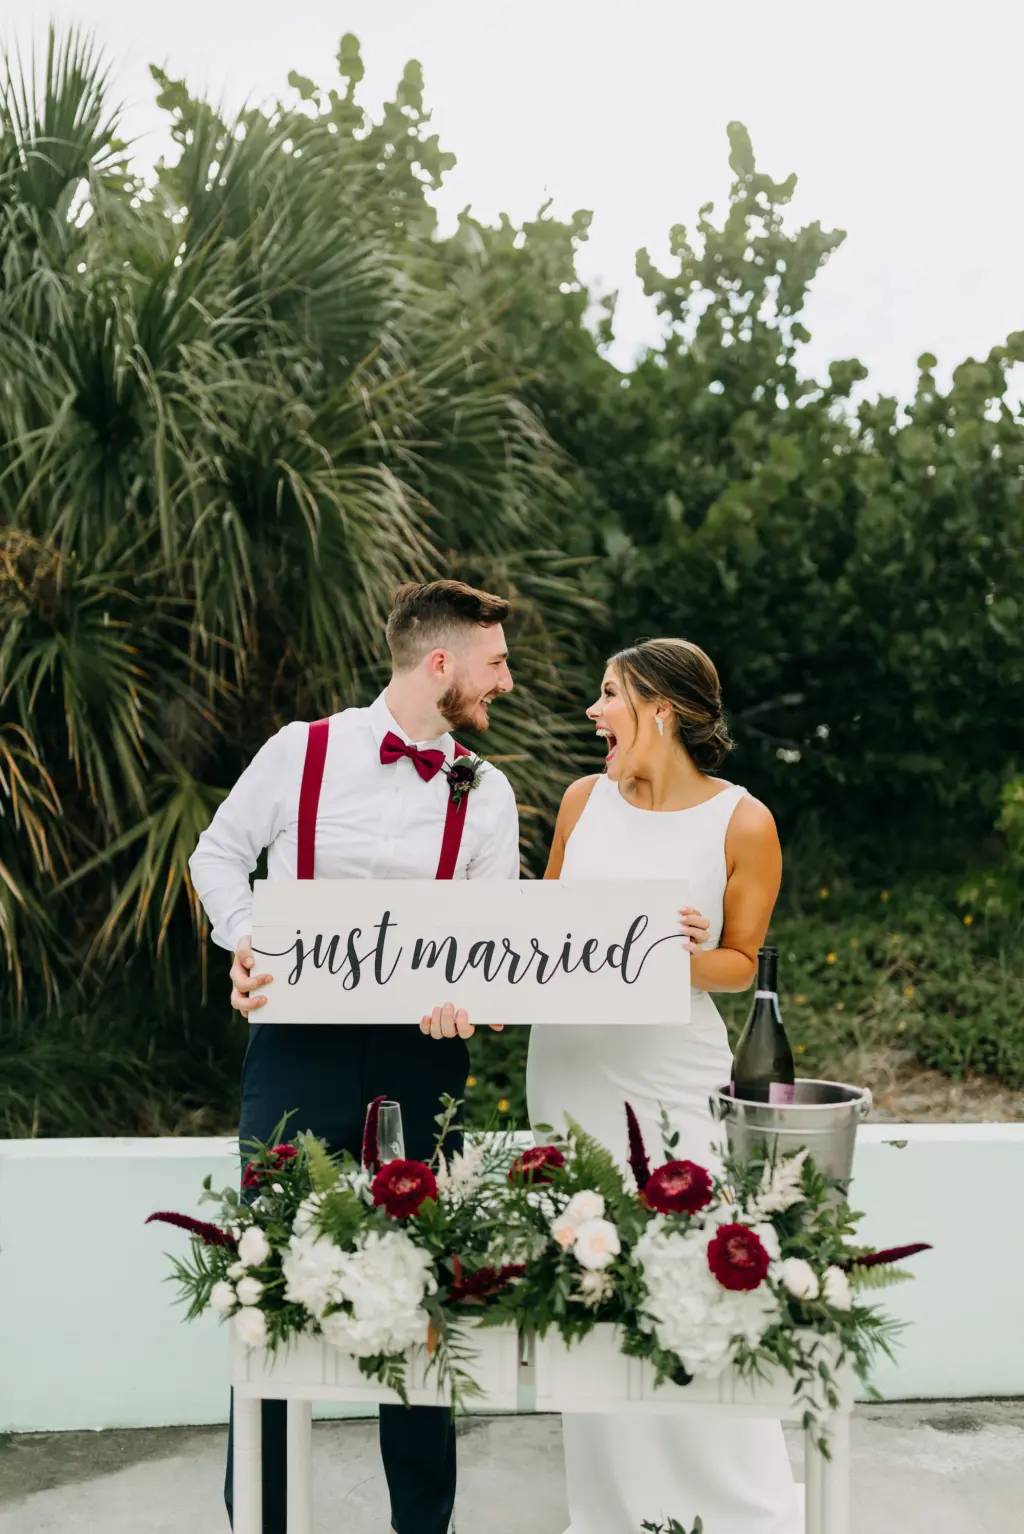 Bride and Groom Just Married Wedding Portrait | Tampa Bay Planner Elope Tampa Bay